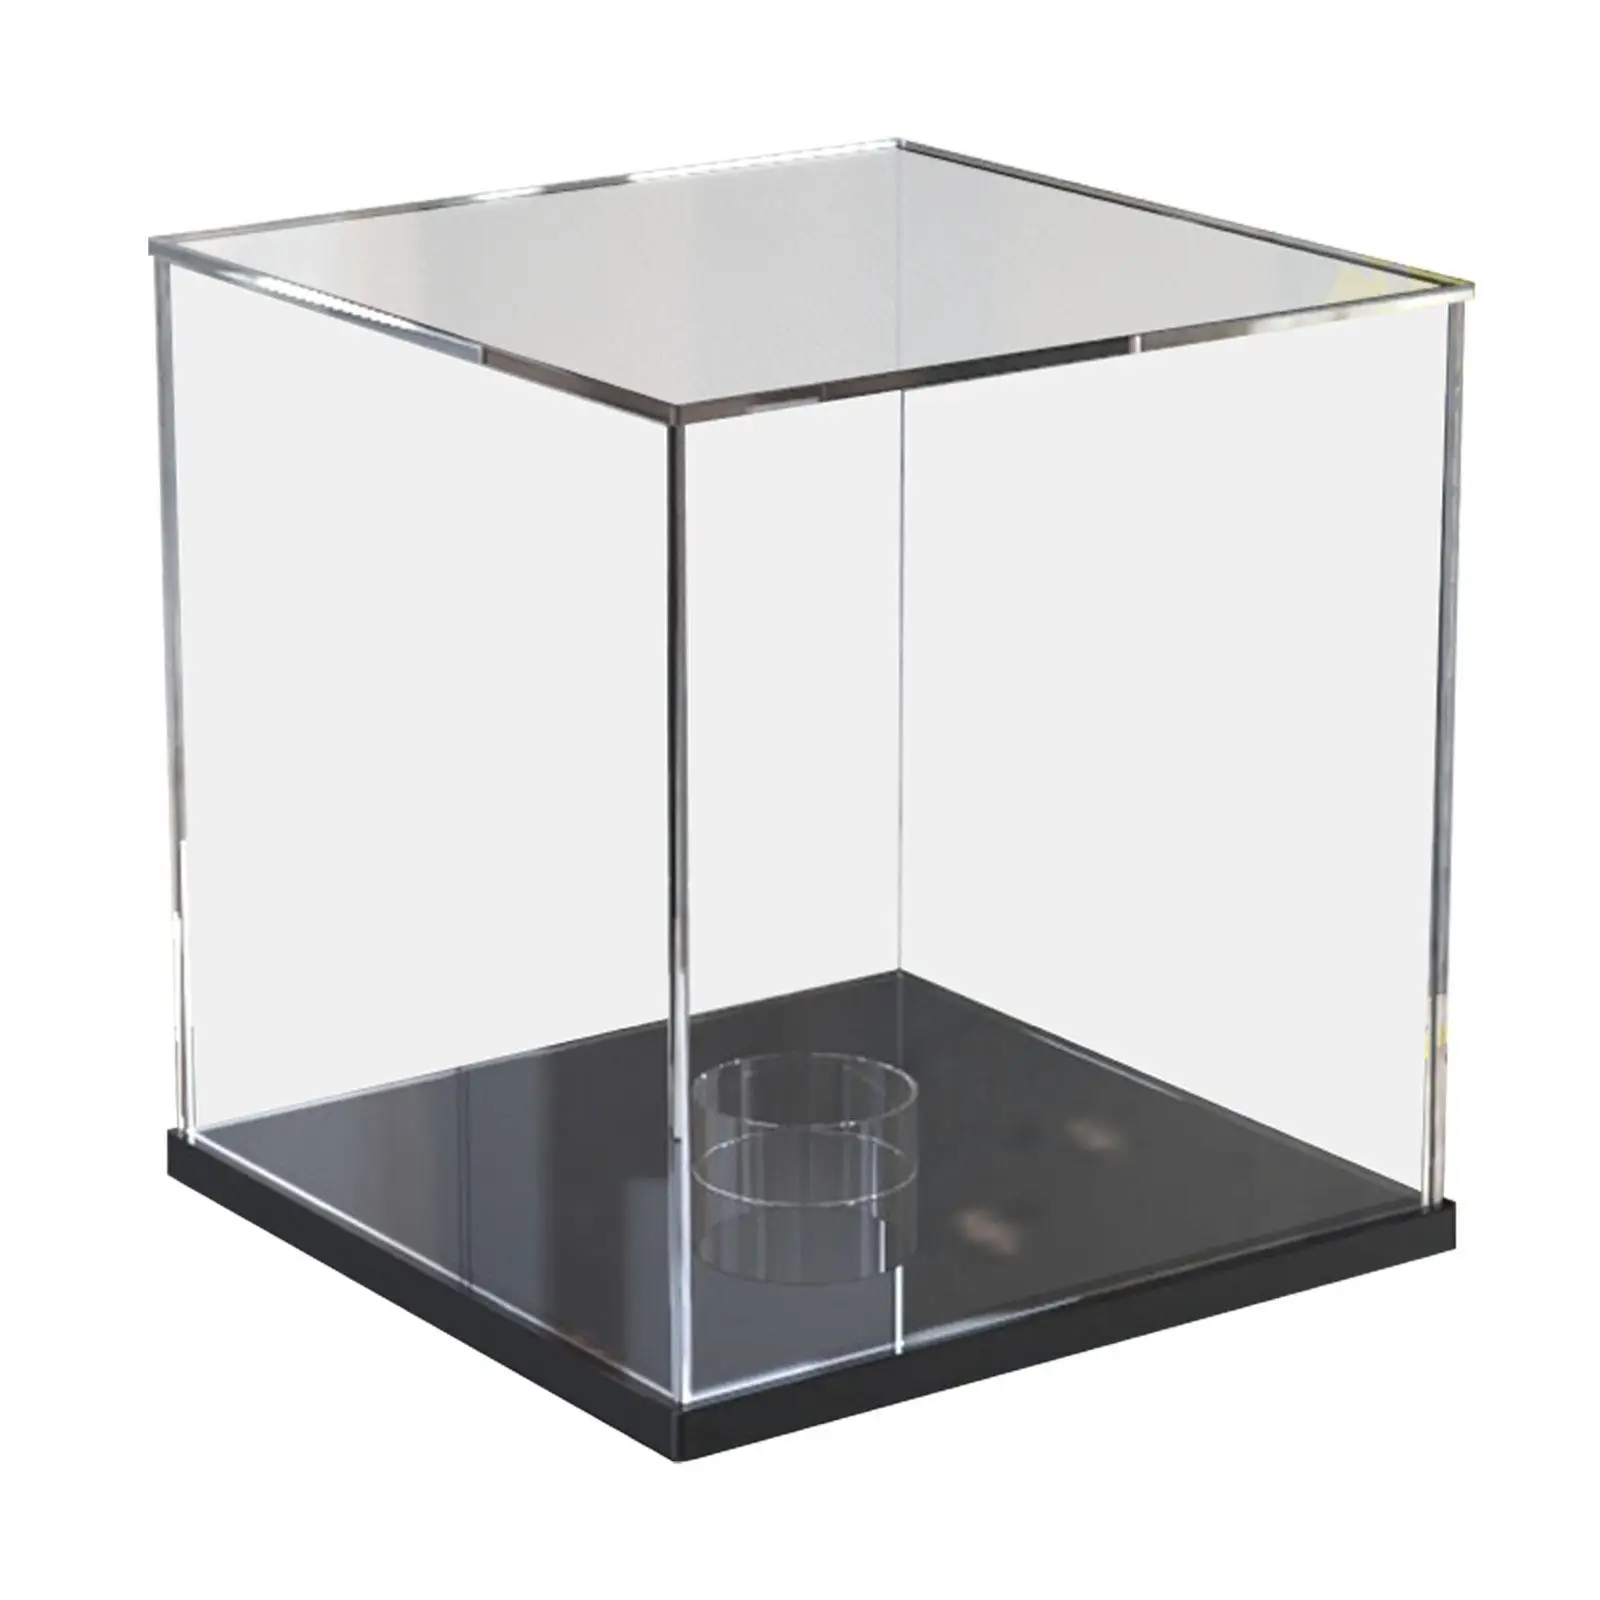 Football Display Cabinet Acrylic Soccer Memorabilia Holder Display Case for Statues Sculptures Baseball Toys Collectibles